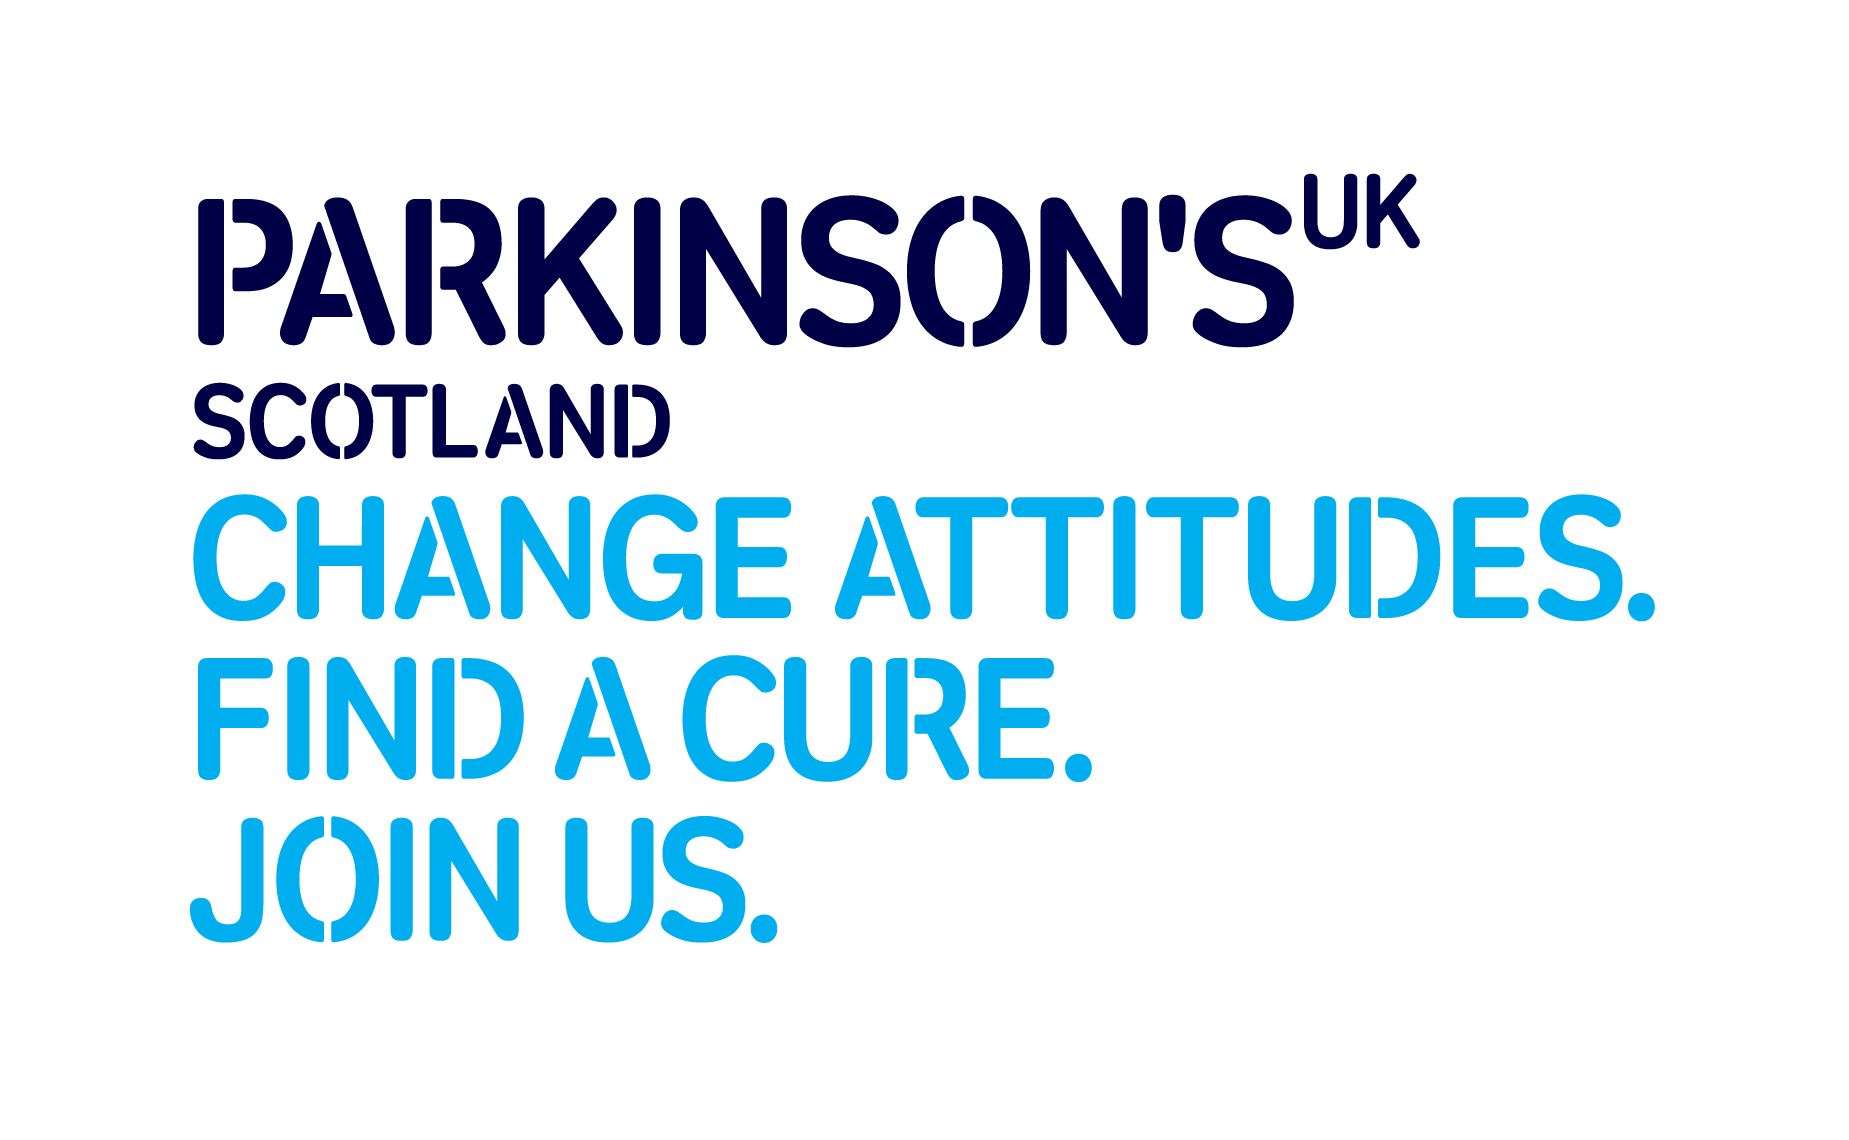 Parkison's UK are launching the new service to bring existing support together.